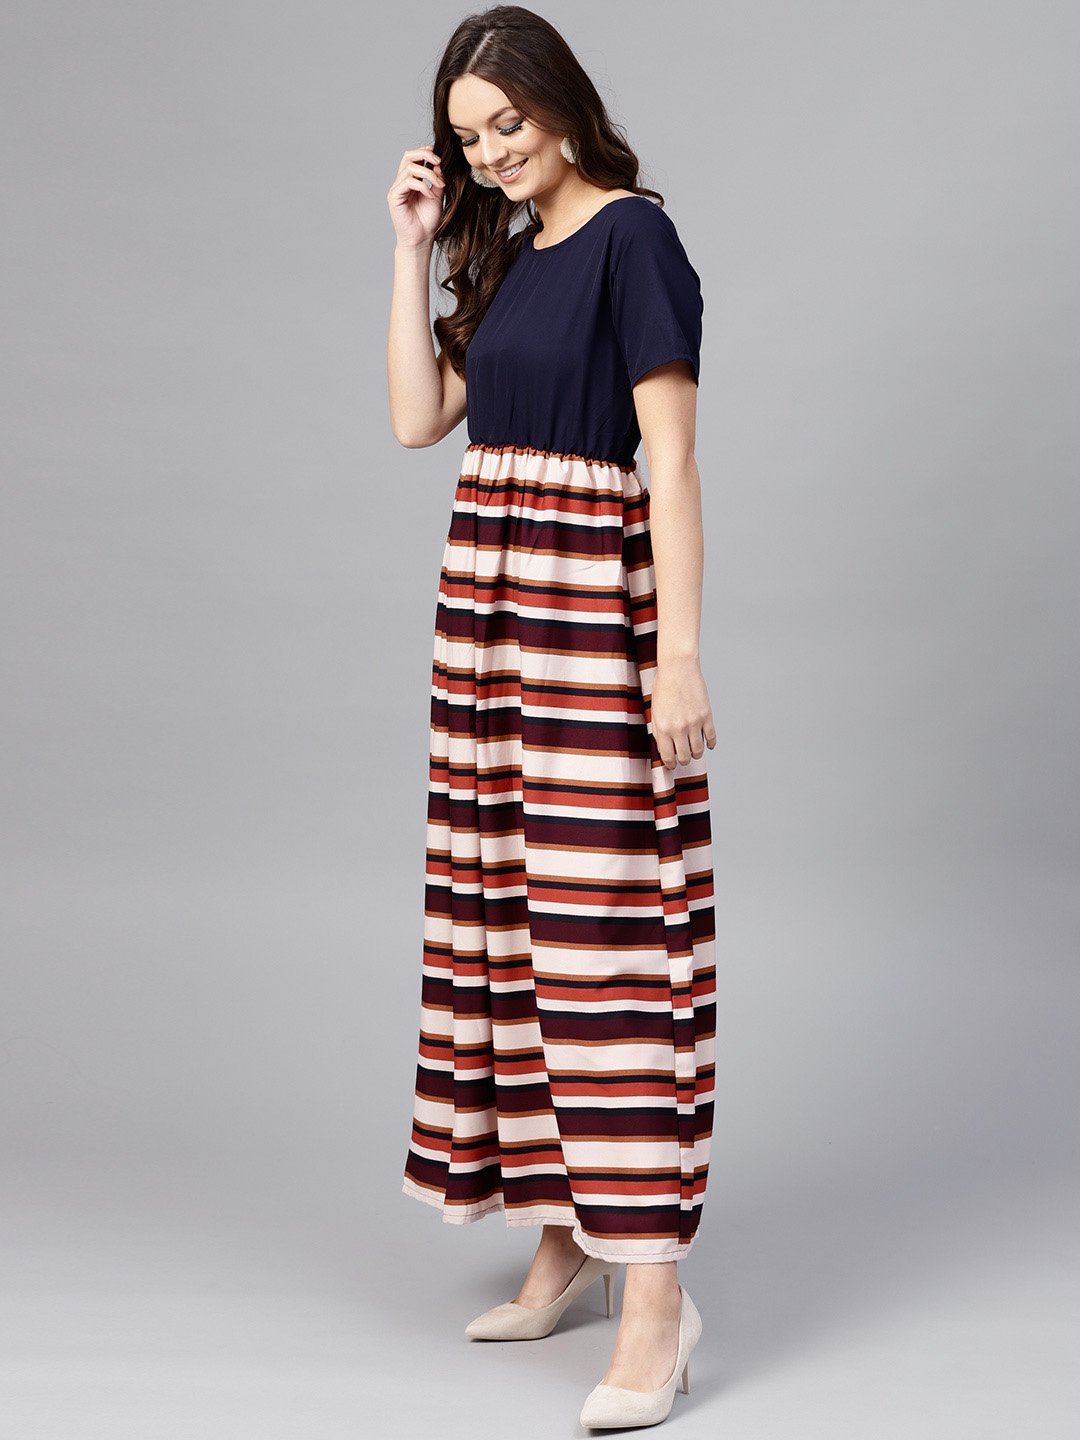 Women's Multi Colored Maxi Dress With Round Neck And Half Sleeves - Nayo Clothing